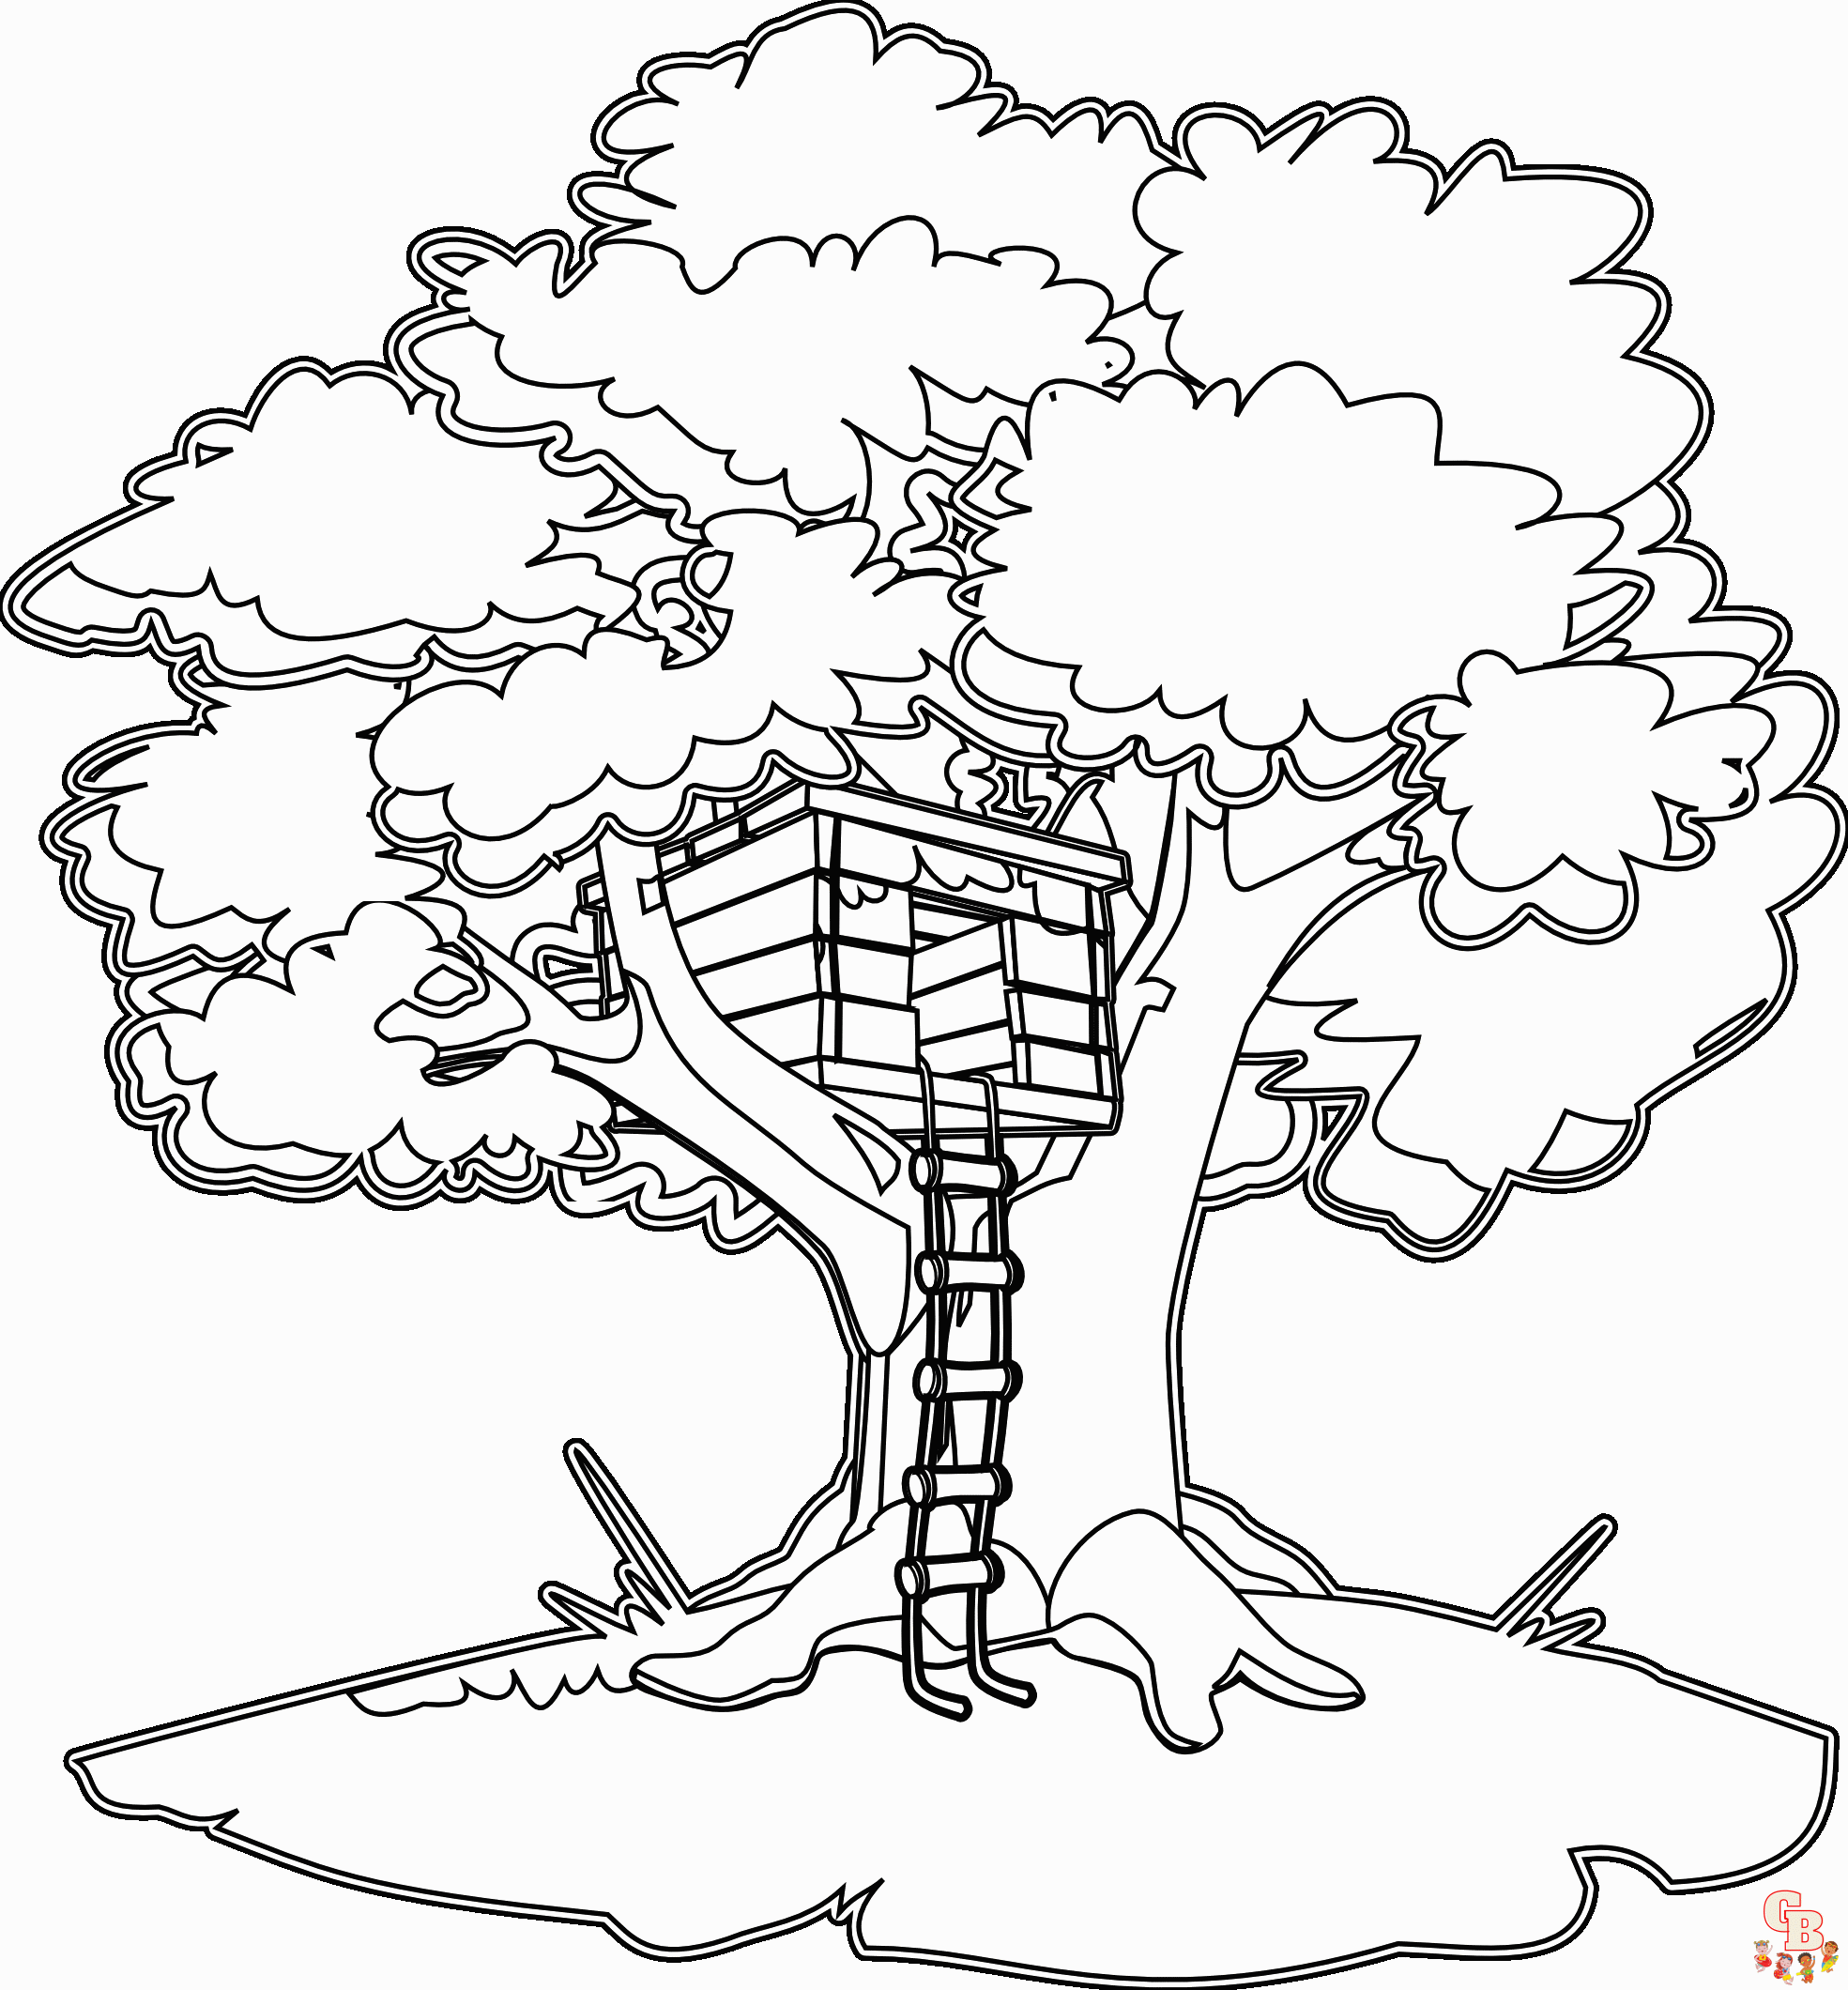 Get creative with tree house coloring pages for kids